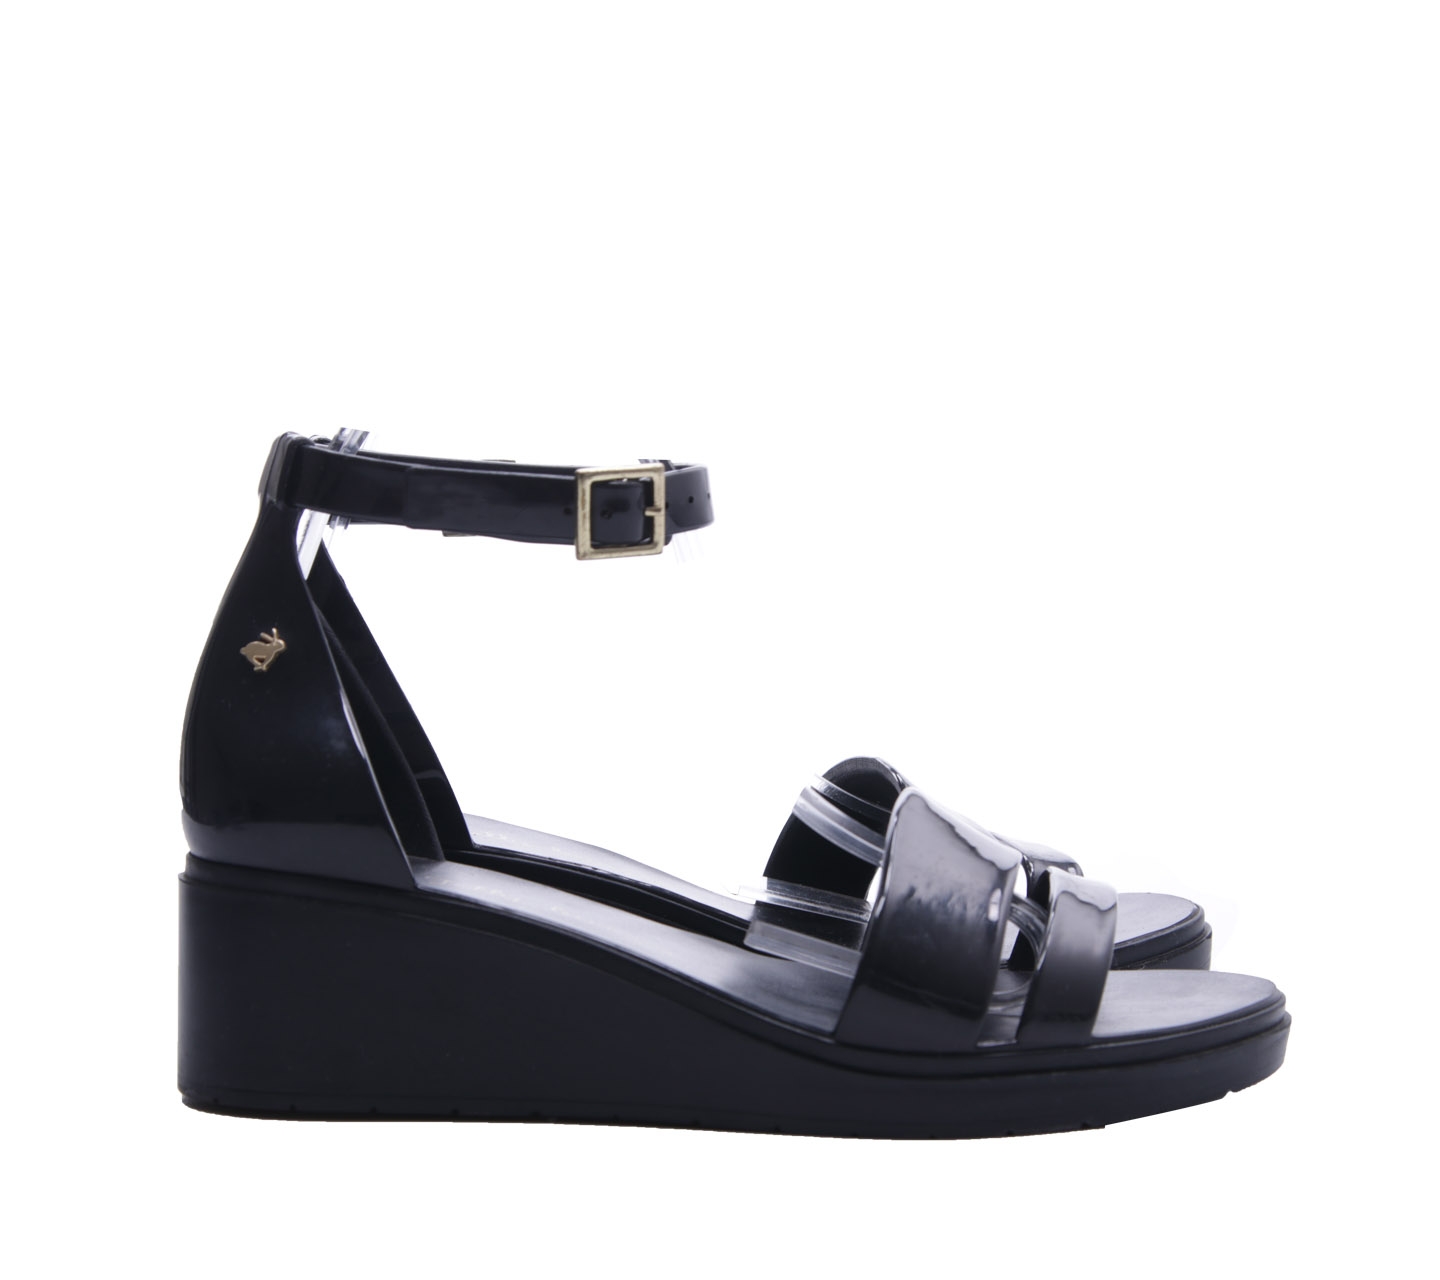 Jelly Bunny Black Wedges